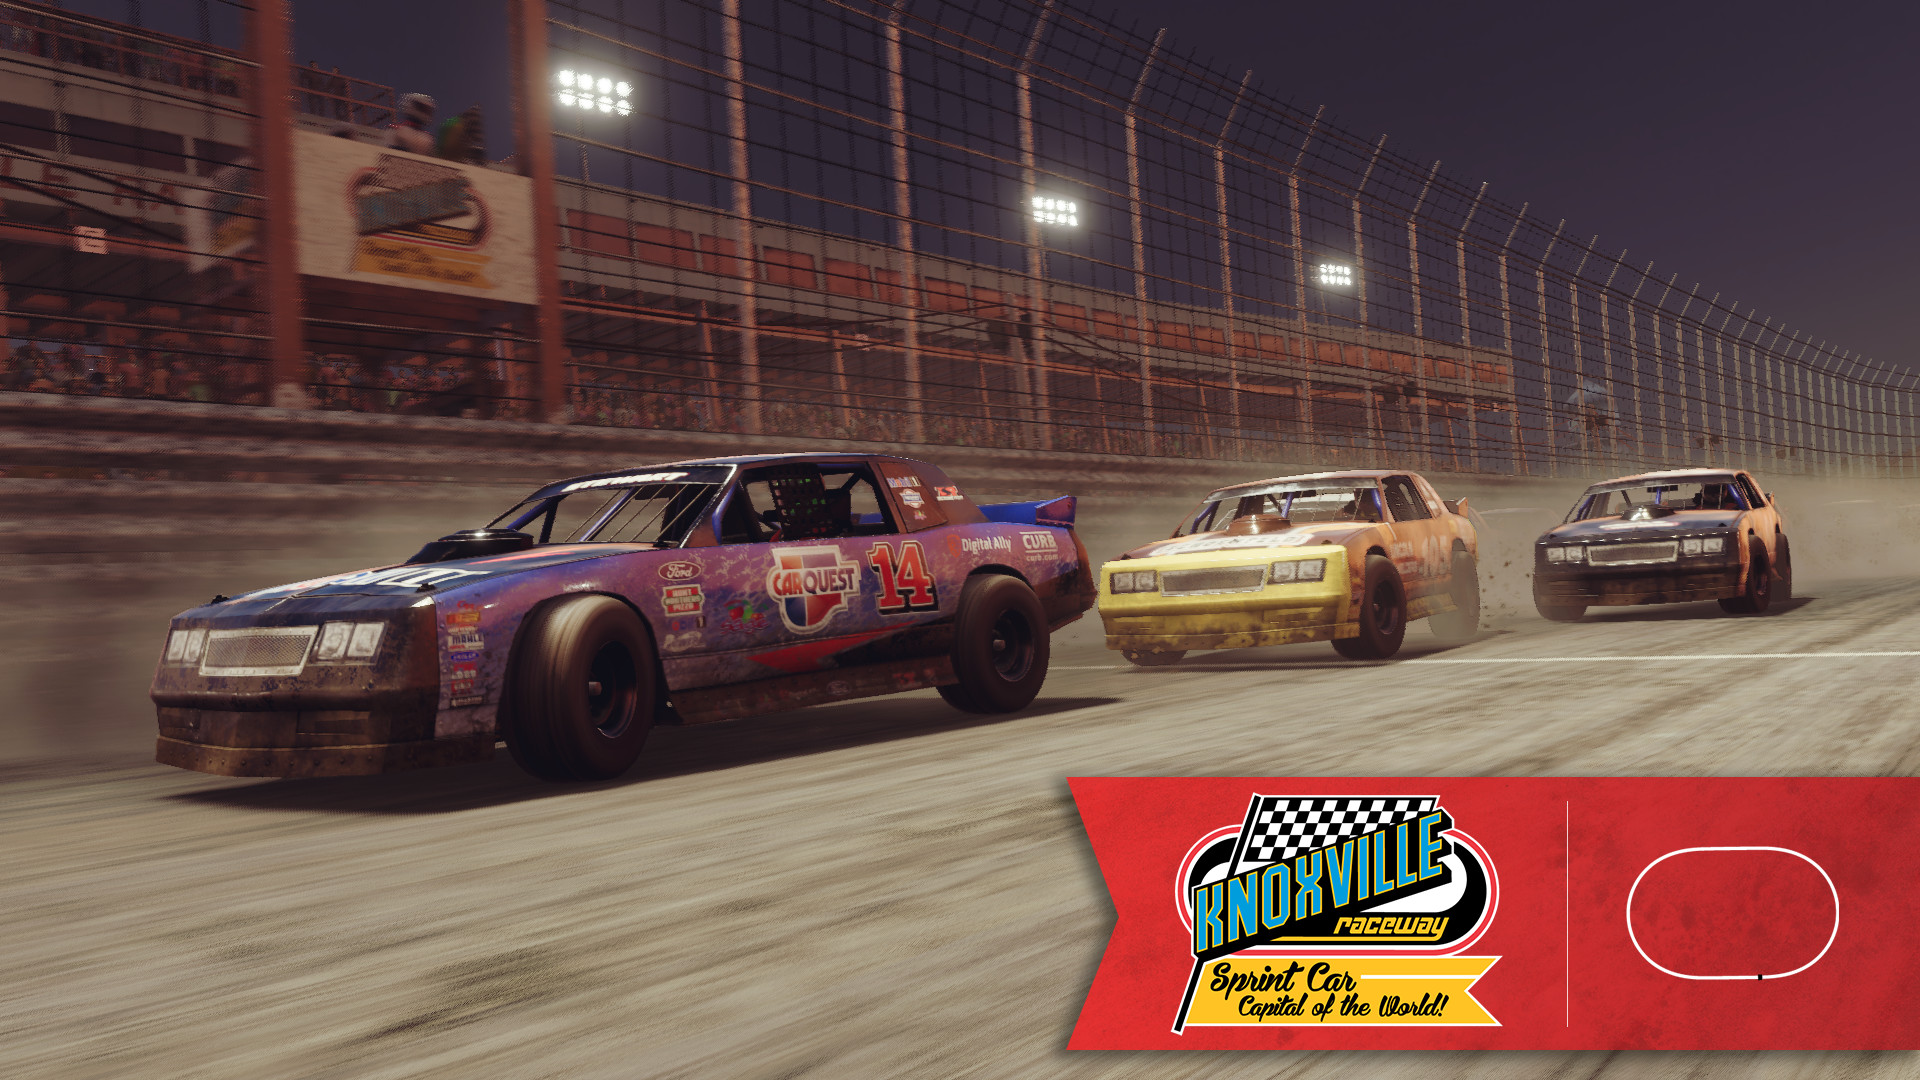 Tony Stewarts All-American Racing Knoxville Raceway on Steam